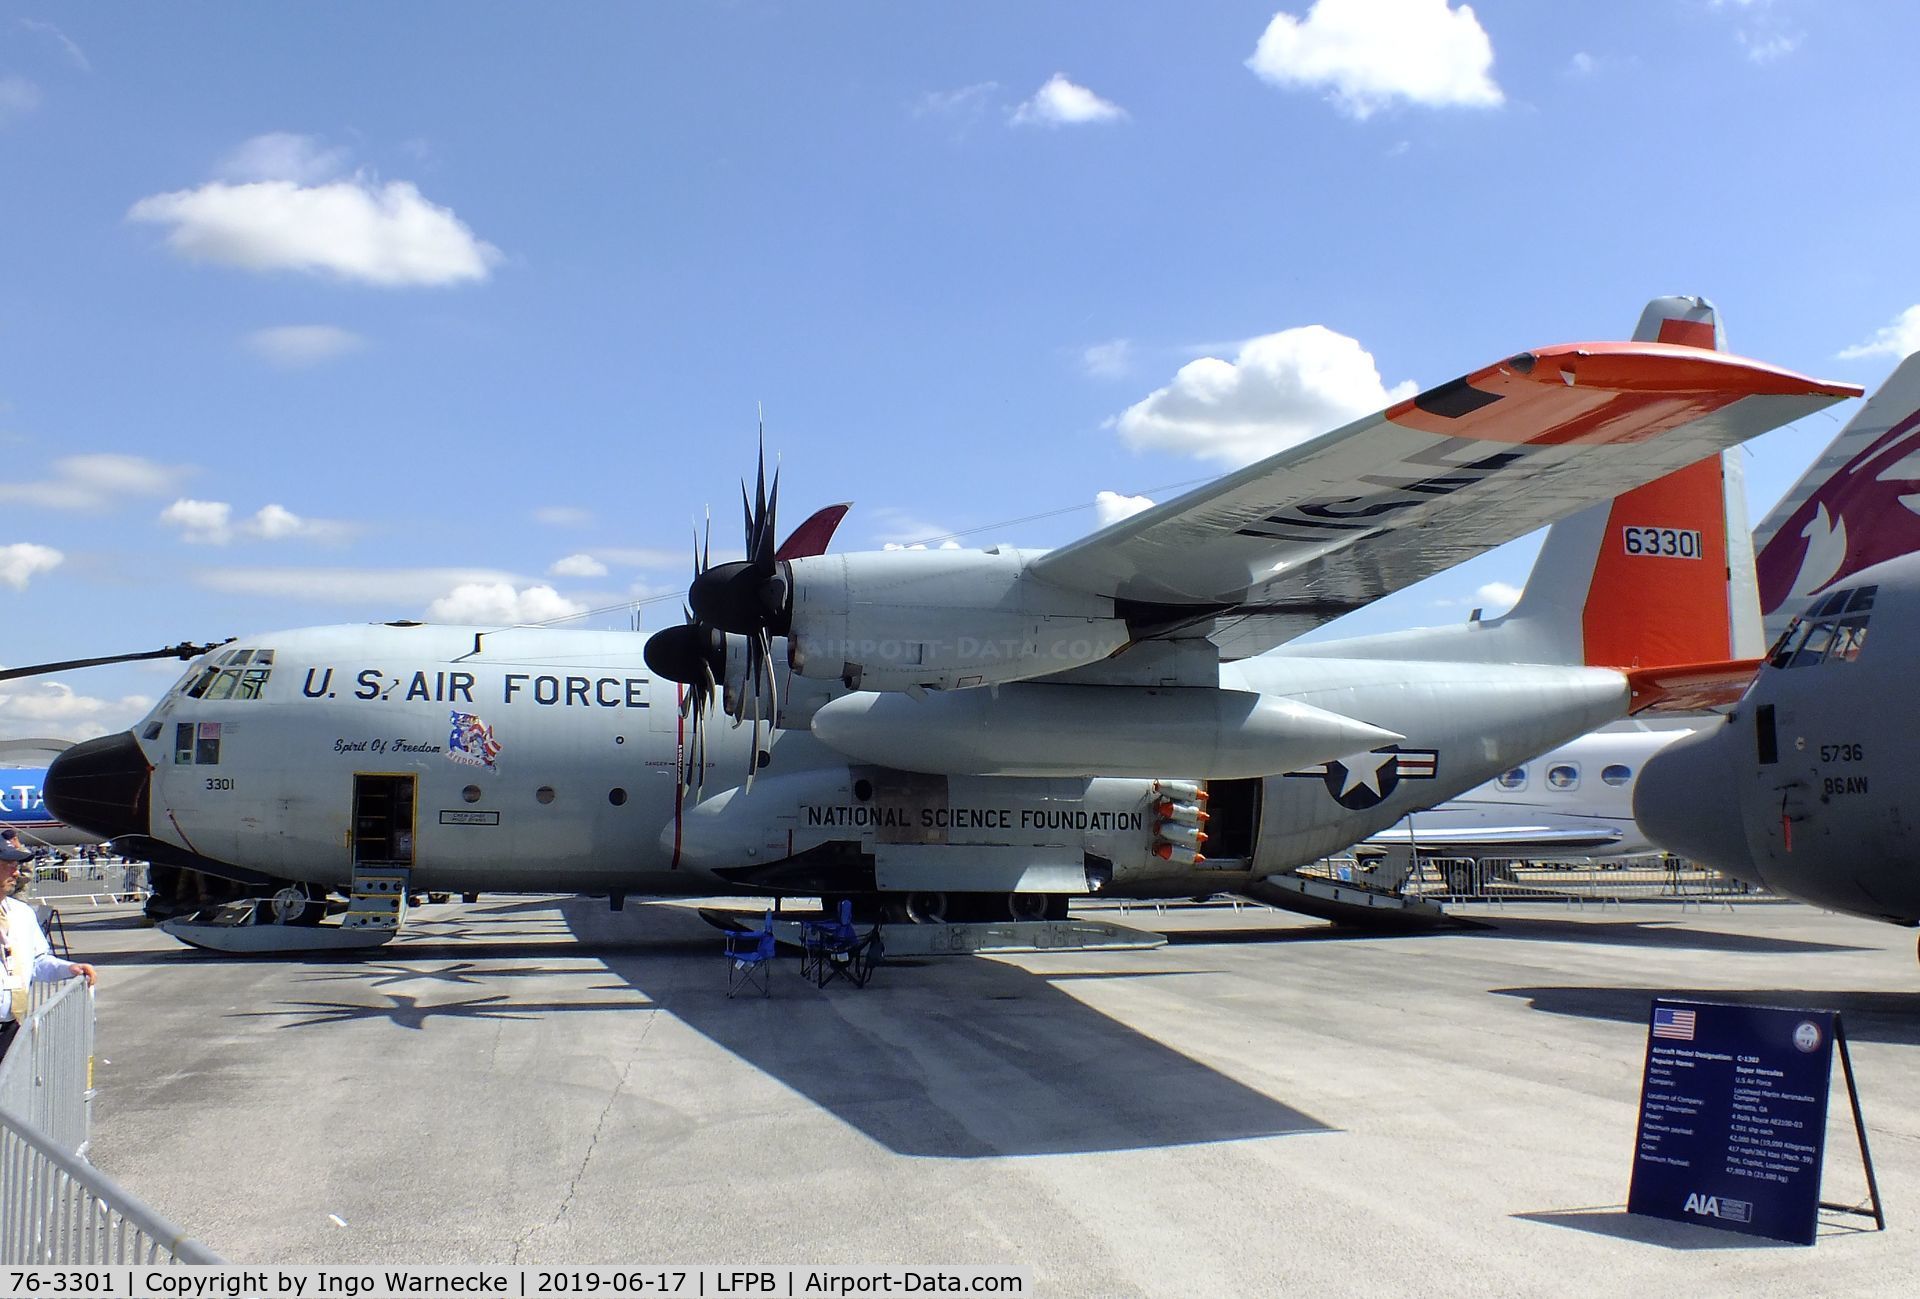 76-3301, 1976 Lockheed LC-130H Hercules C/N 382-4725, Lockheed Martin LC-130H Hercules of the USAF / National Science Foundation, upgraded with NP2000 propellers, at the Aerosalon 2019, Paris